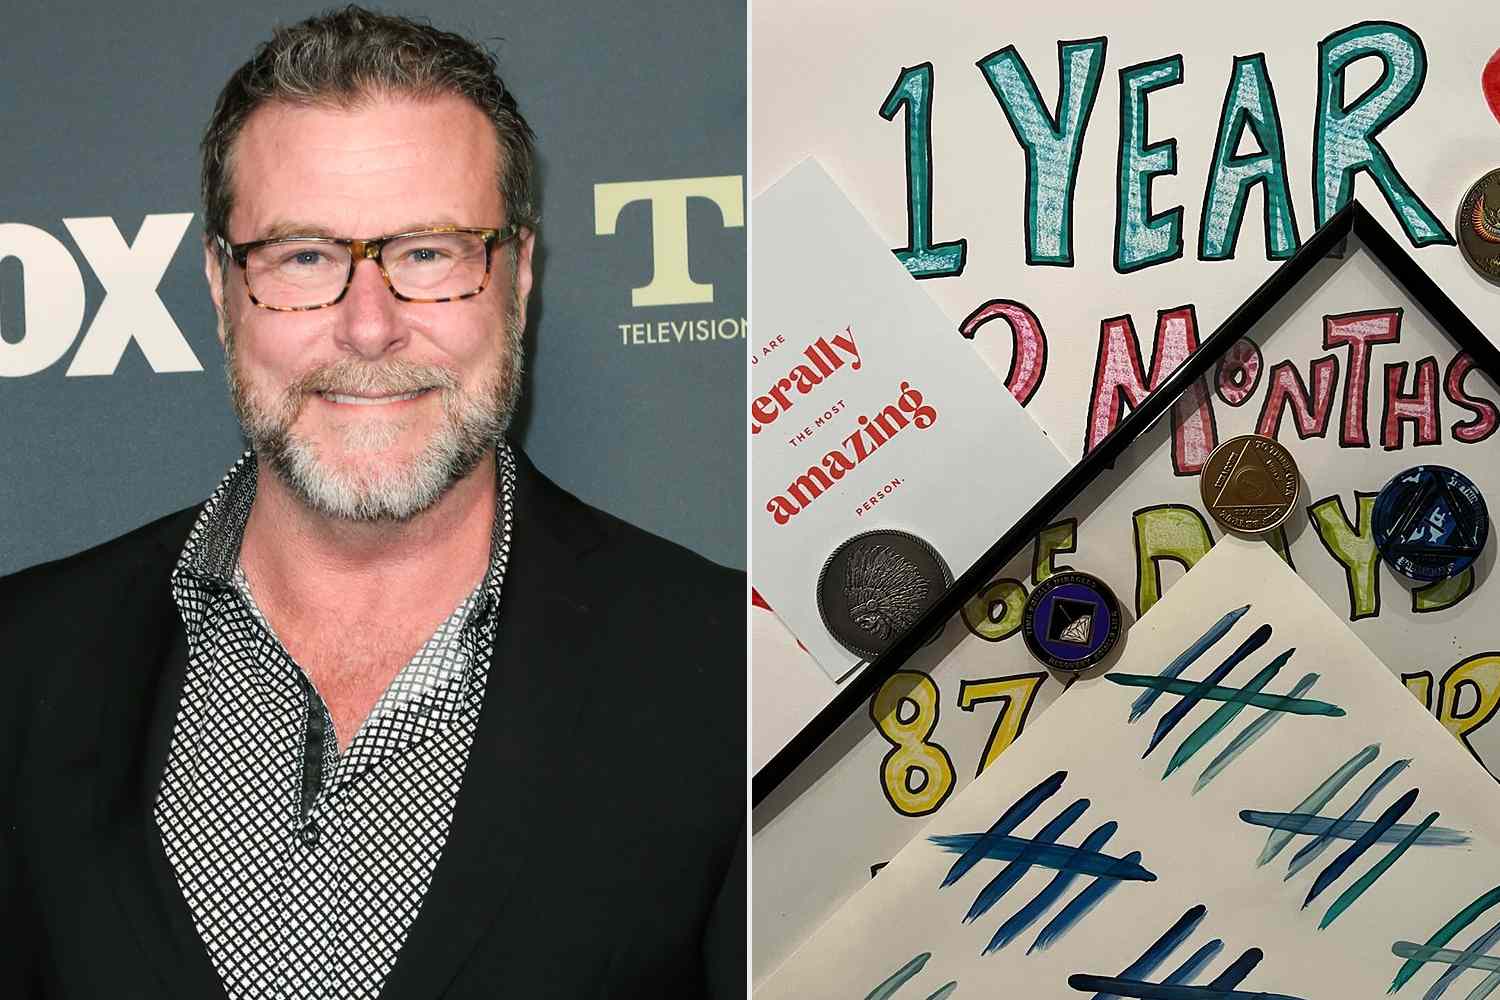 Dean McDermott Celebrates 1 Year of Sobriety: ‘A Beautiful Life Awaits’ [Video]